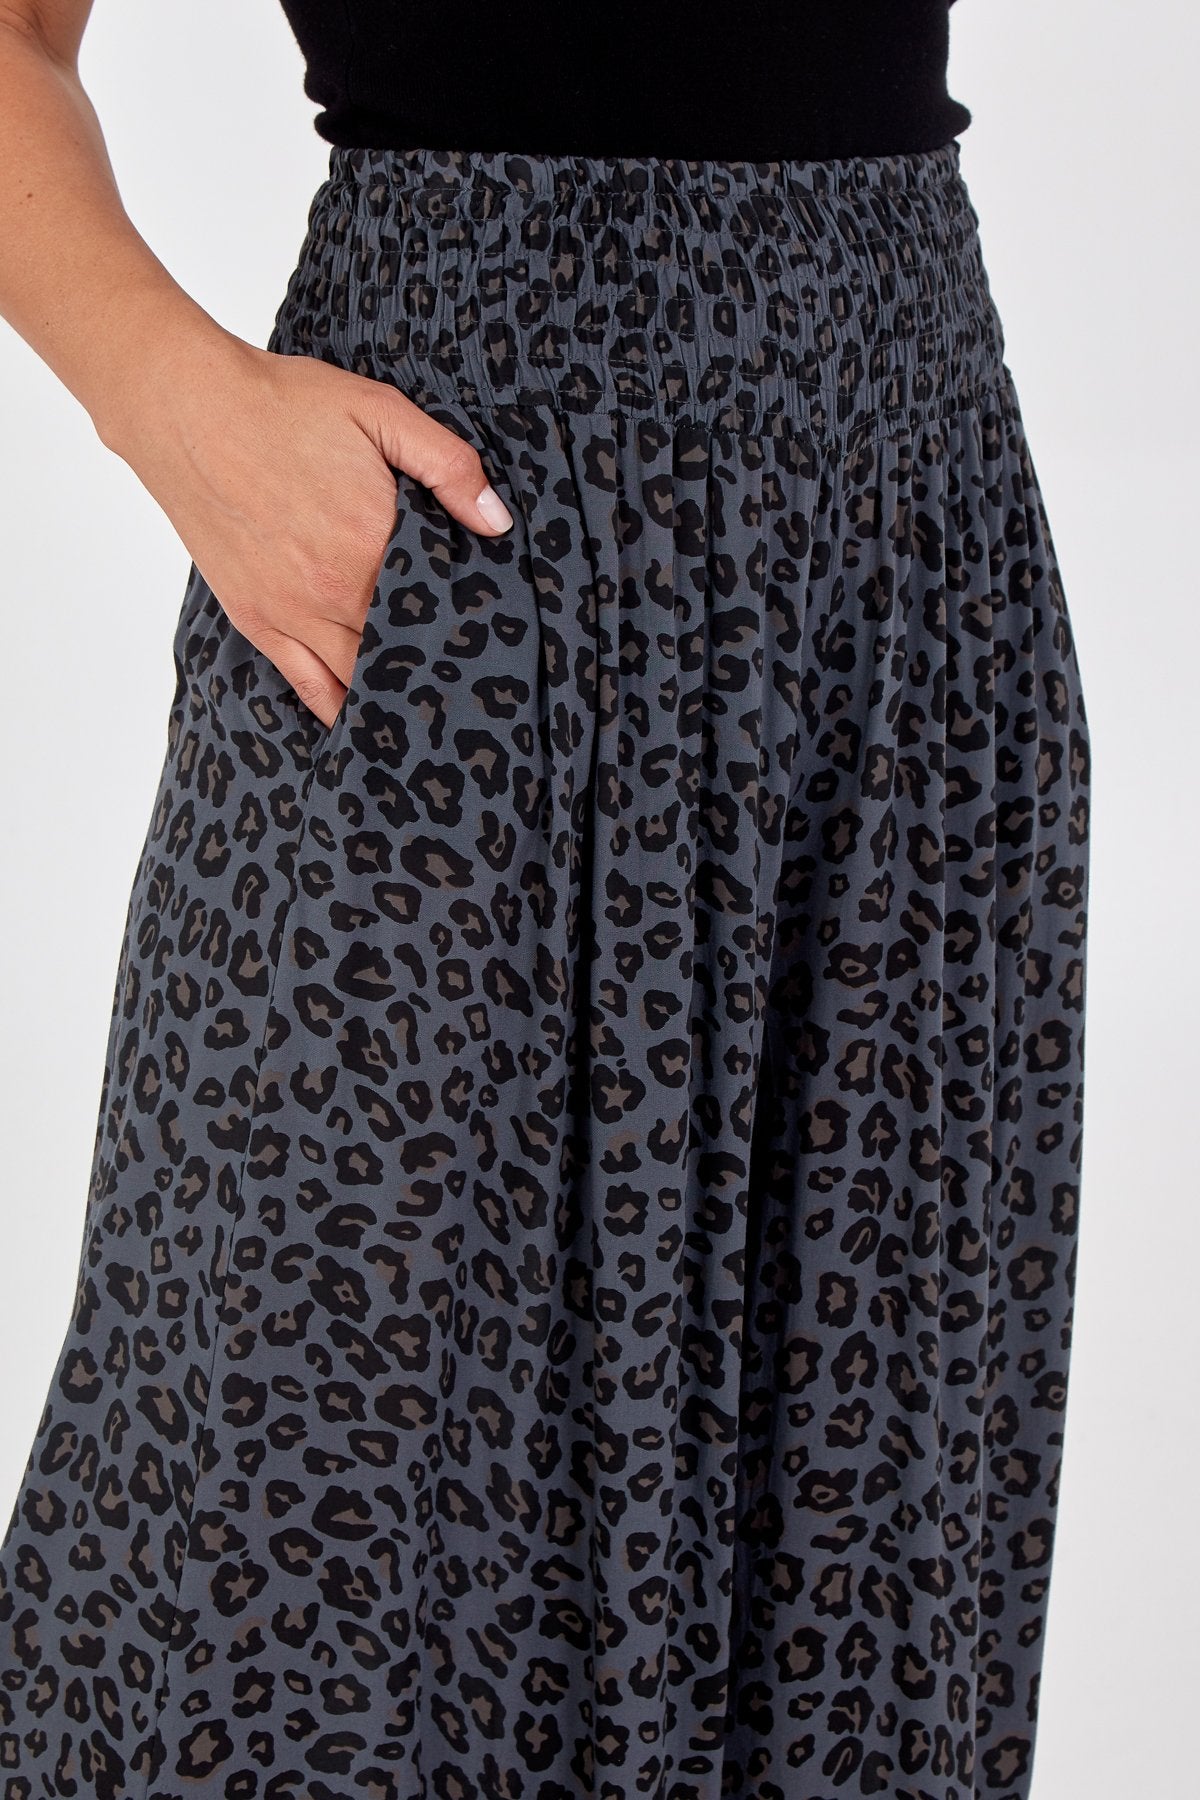 Unstoppable Truth Leopard Wide Leg Pants FINAL SALE  Pink Lily